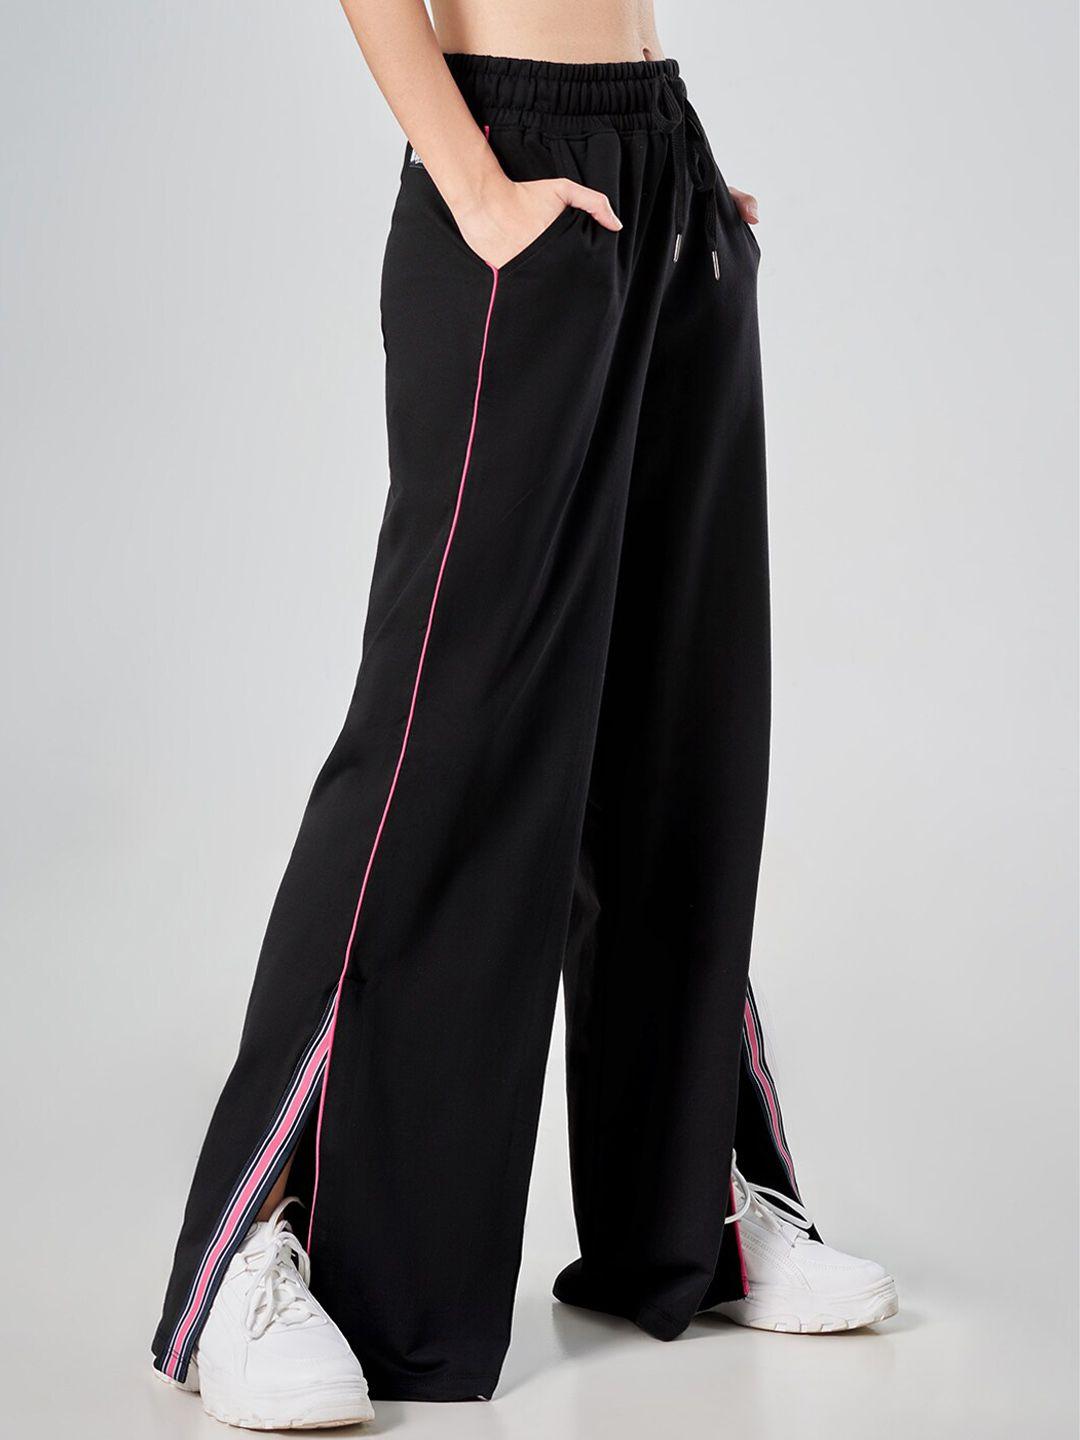 the-souled-store-women-black-solid-flared-track-pants